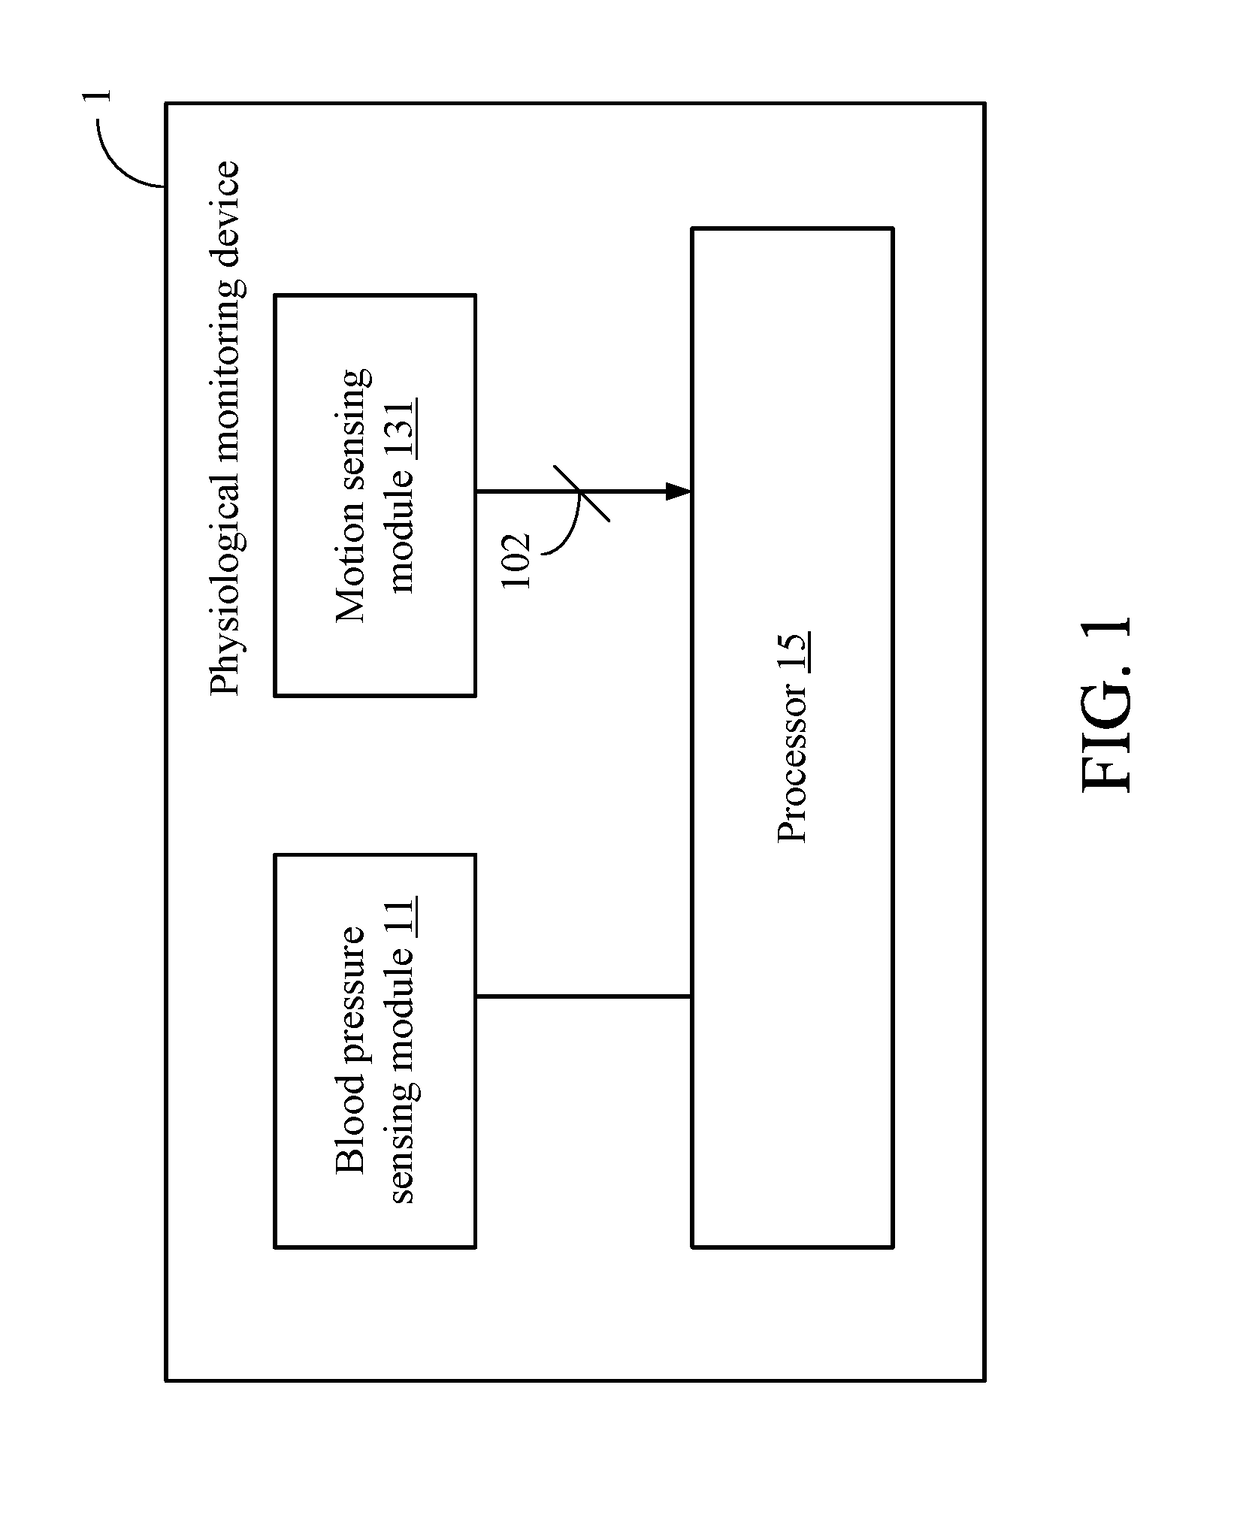 Physiological monitoring device, physiological monitoring method and non-transitory computer readable storage medium for implementing the physiological monitoring method